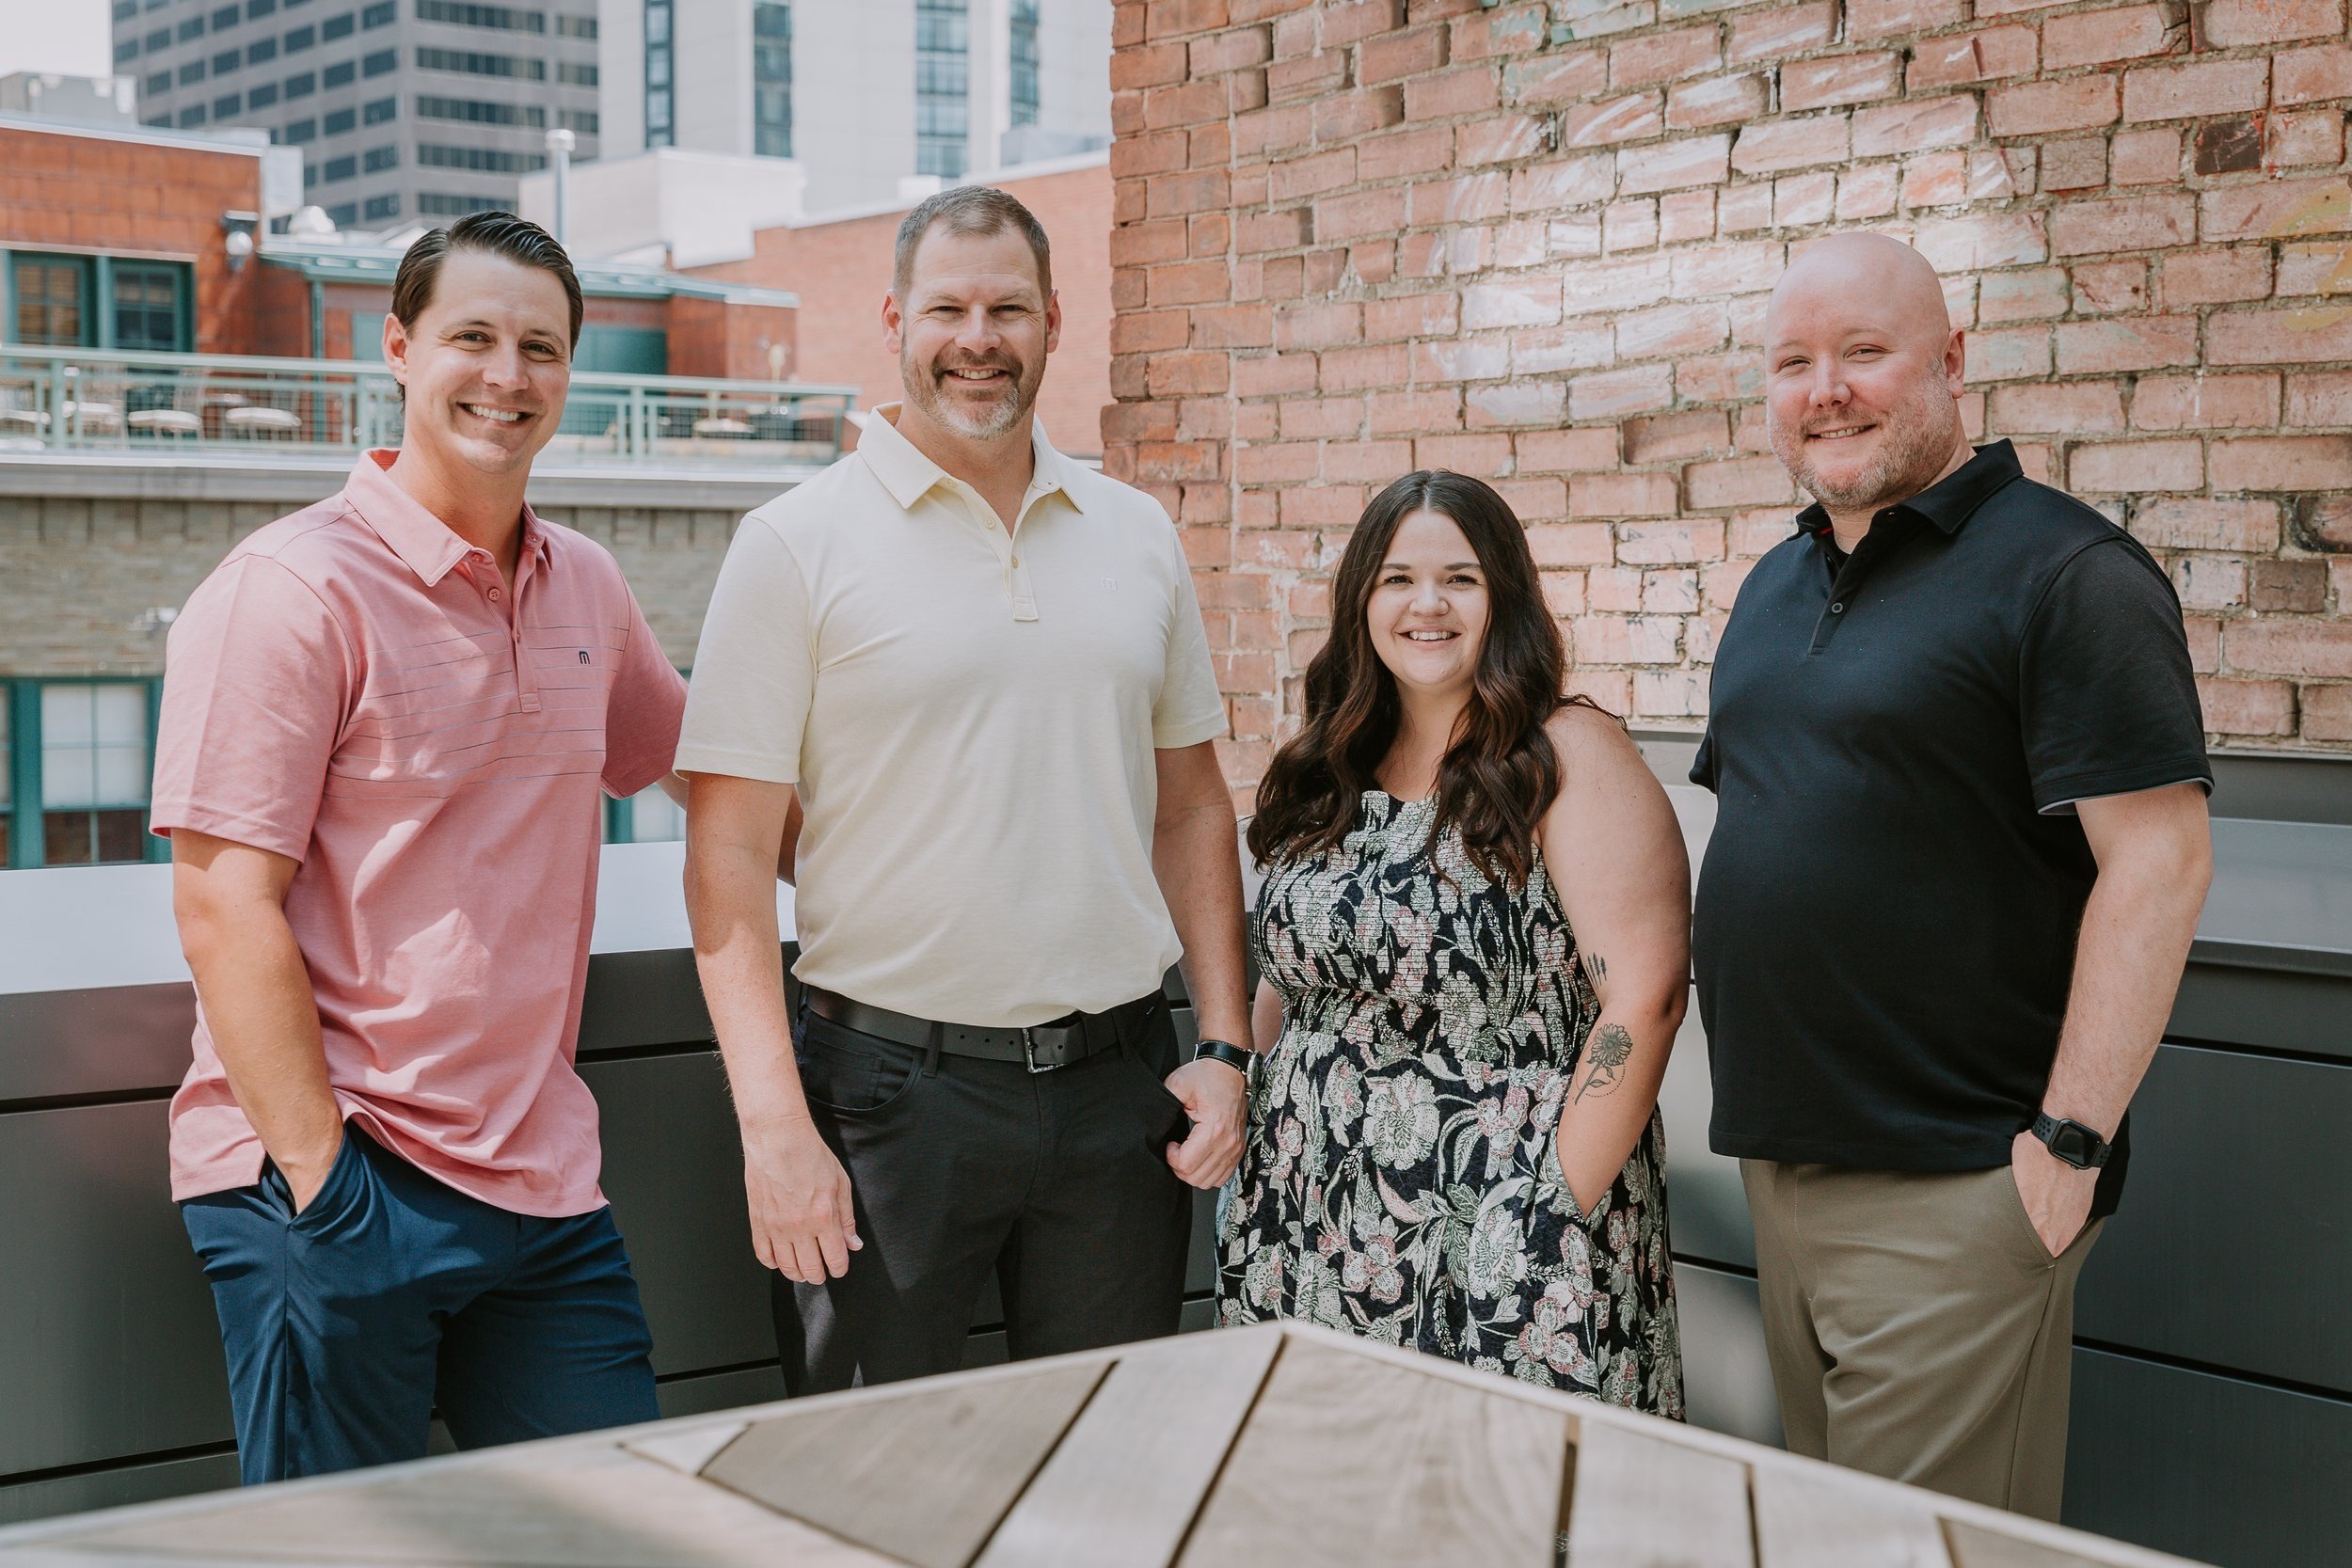                       Meet Our Team    Click to learn more about Dan, Mike, Taylor and Brock  